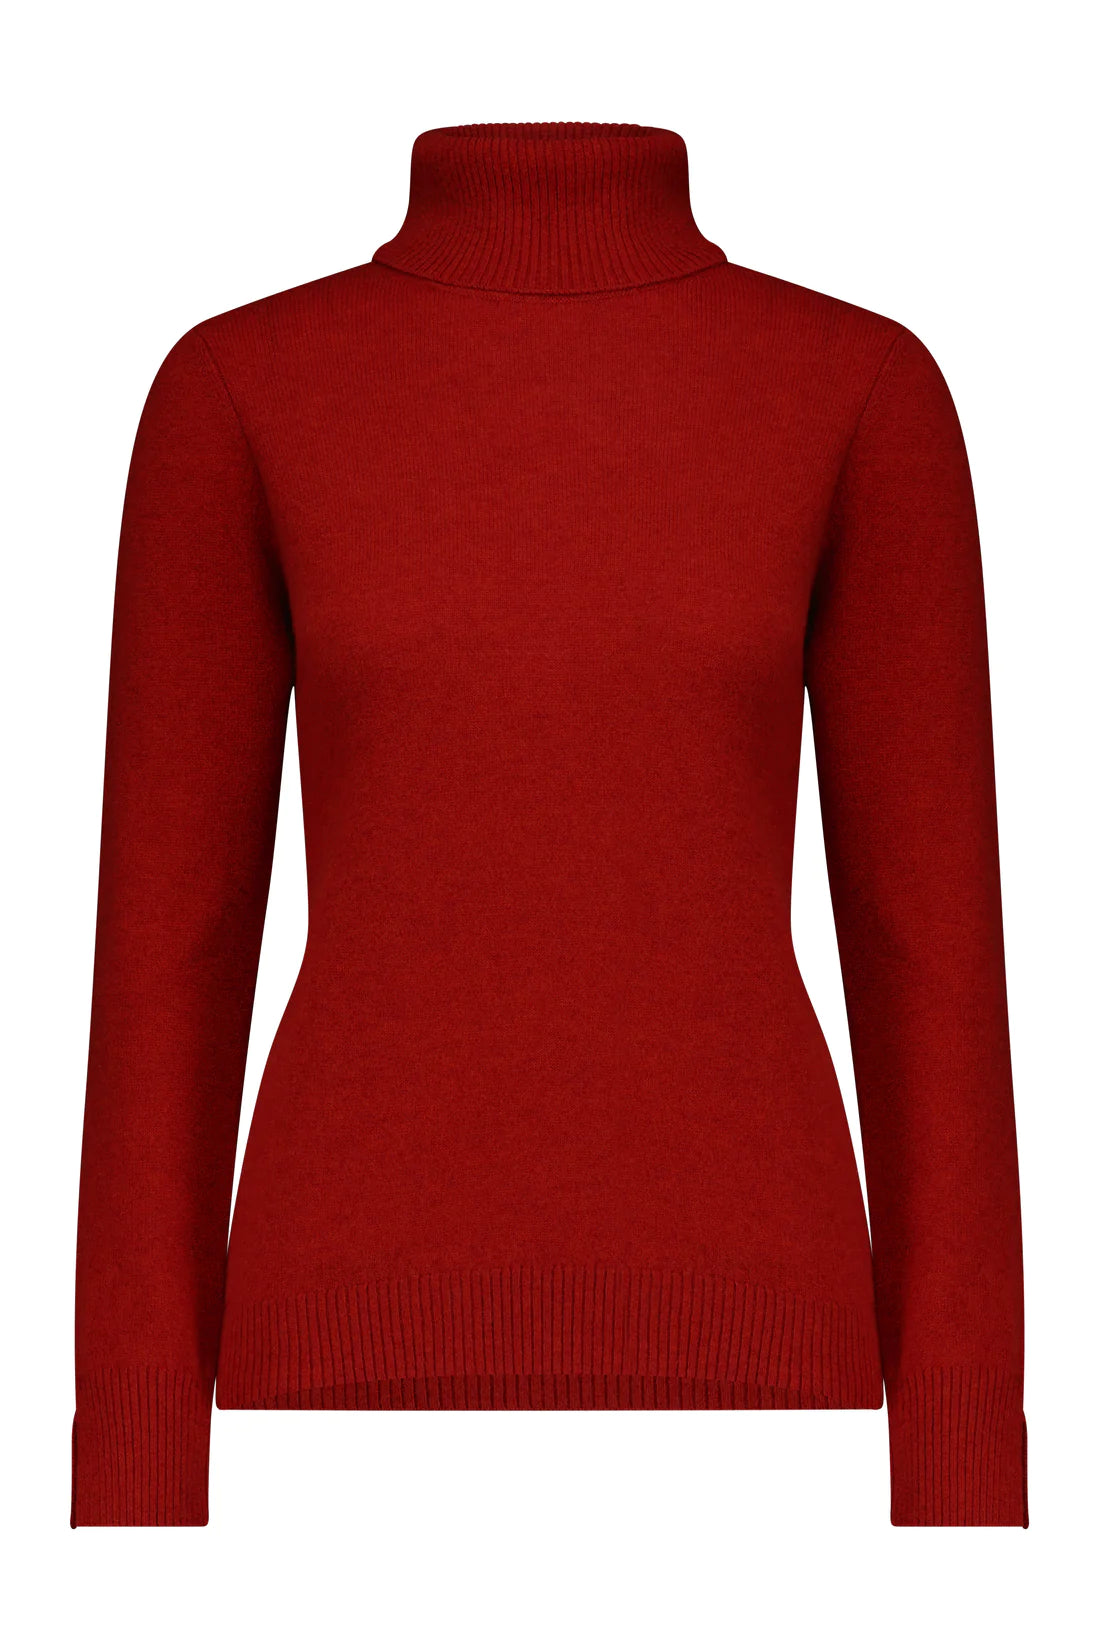 100% Cashmere Turtleneck Pullover With Slit Sleeve Detail 8338 - Minnie Rose